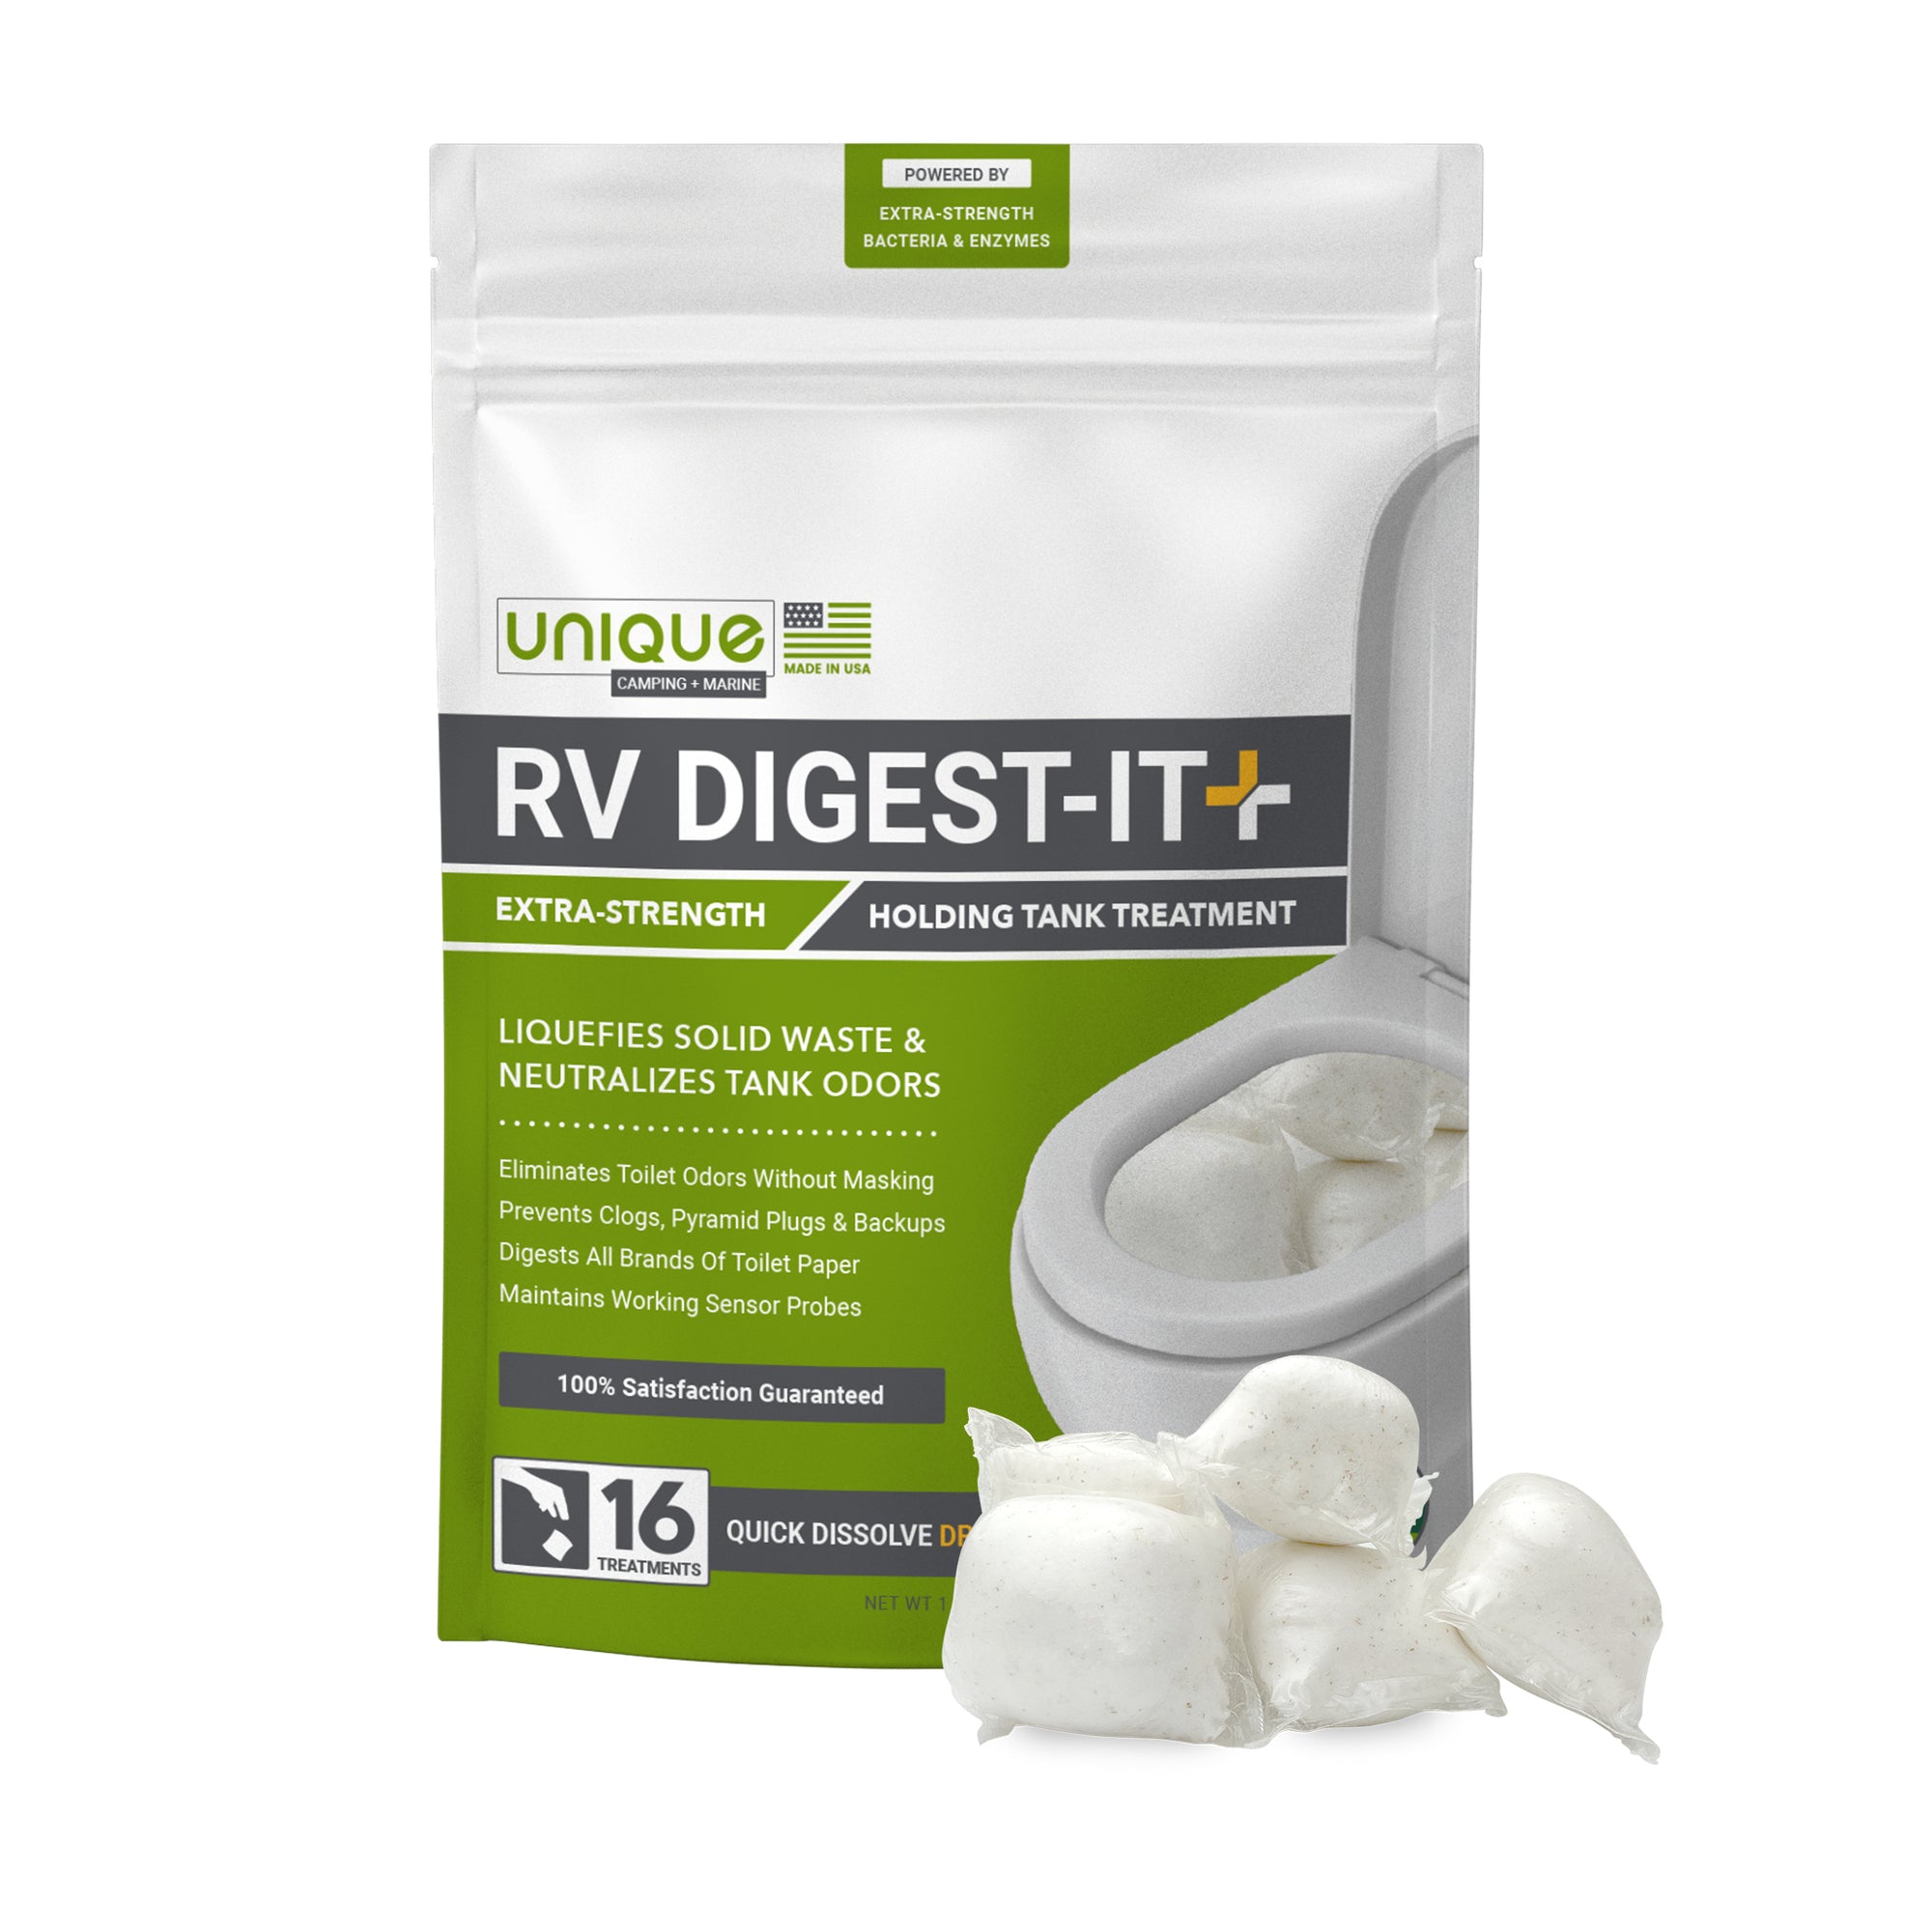 New Product! RV Digest-It Plus Drop-In Pods Extra Strength Holding Tank Treatment. Unique Camping + Marine